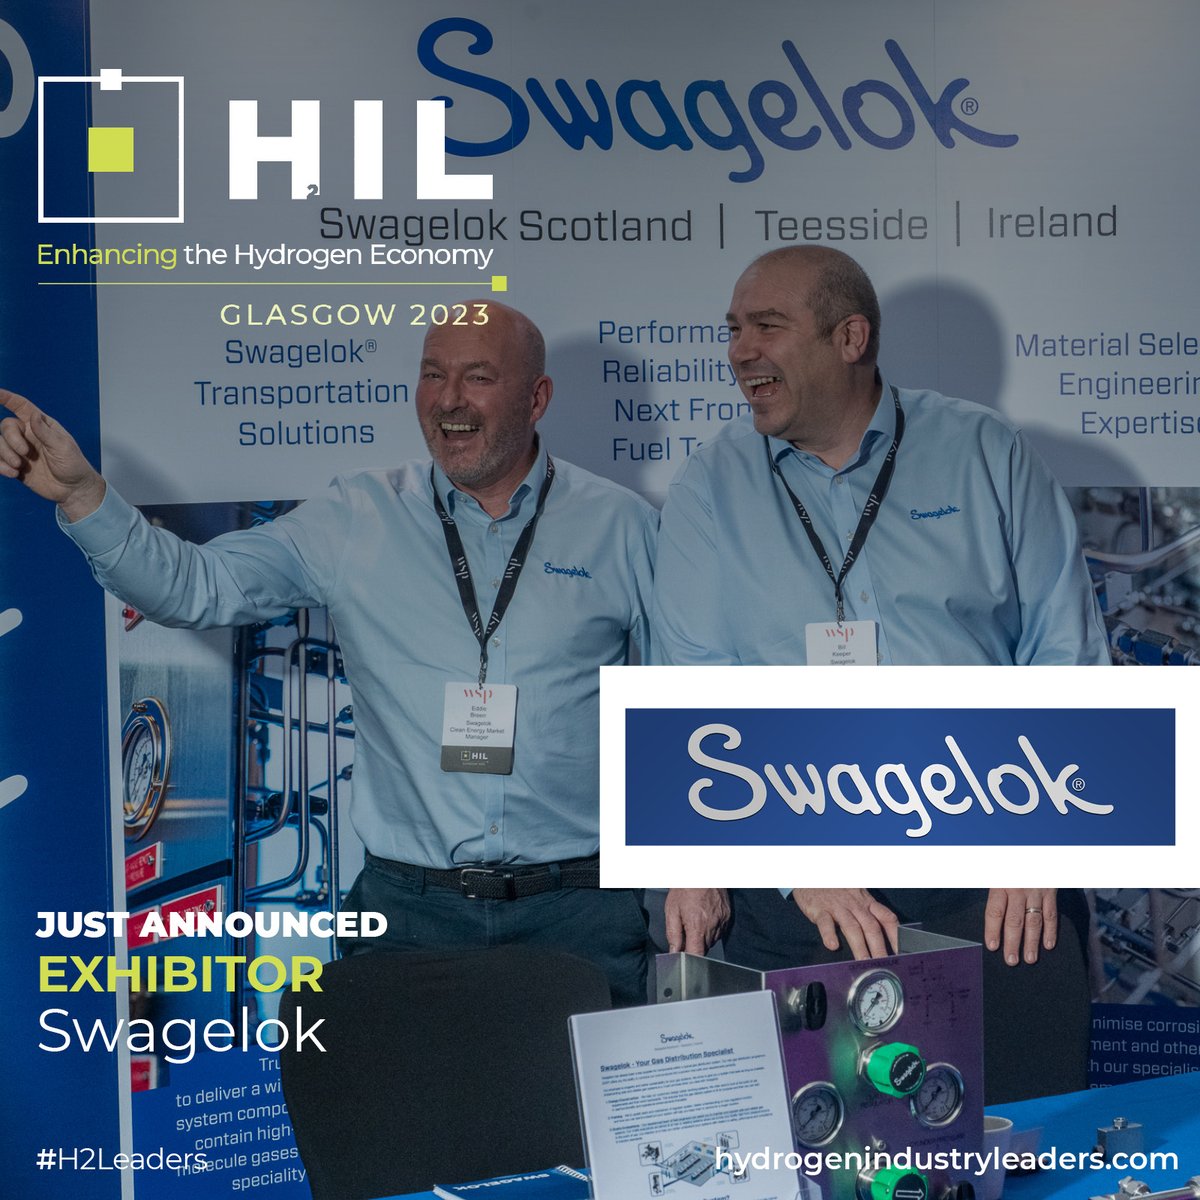 🌟 Just Announced! 

Swagelok will be exhibiting at HIL Glasgow! 🎉

🔗 Register your interest here: ow.ly/zZO050PNQJS

#H2Leaders #Energy #HydrogenEconomy #HydrogenIndustry #EnergyTransition #CleanEnergy #HydrogenEvent #Swagelok #EnergyEvent